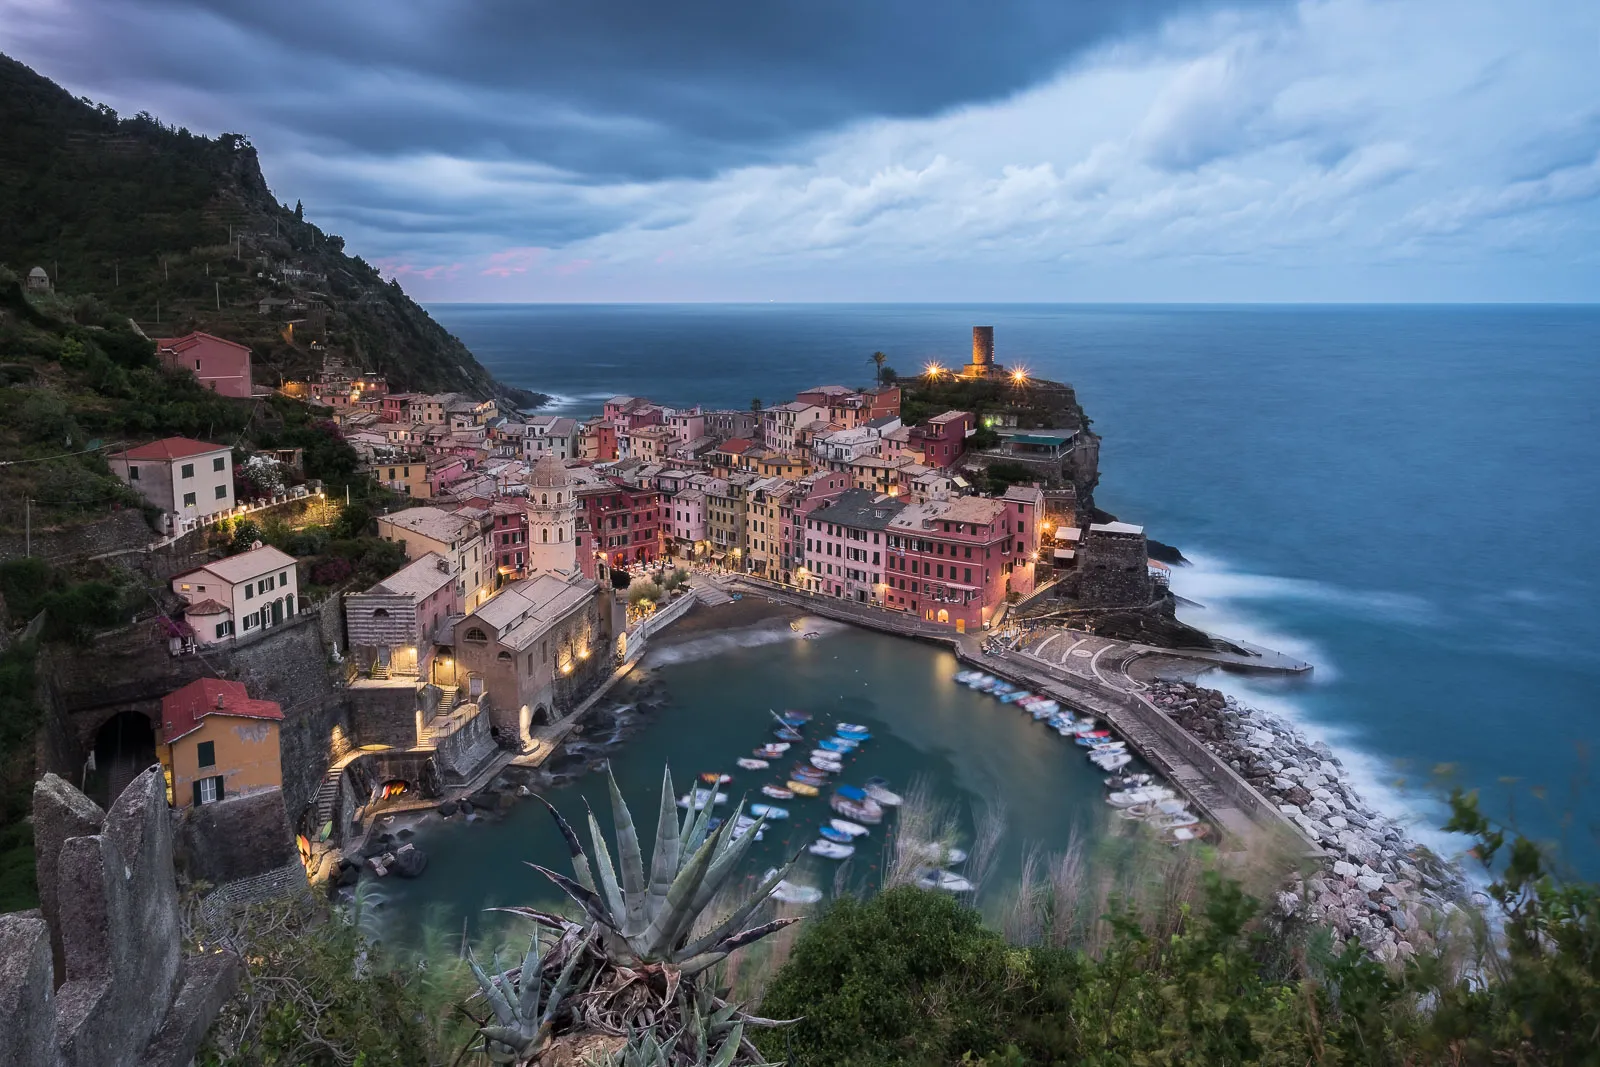 Stormy clouds gathering over Vernazza, Cinque Terre